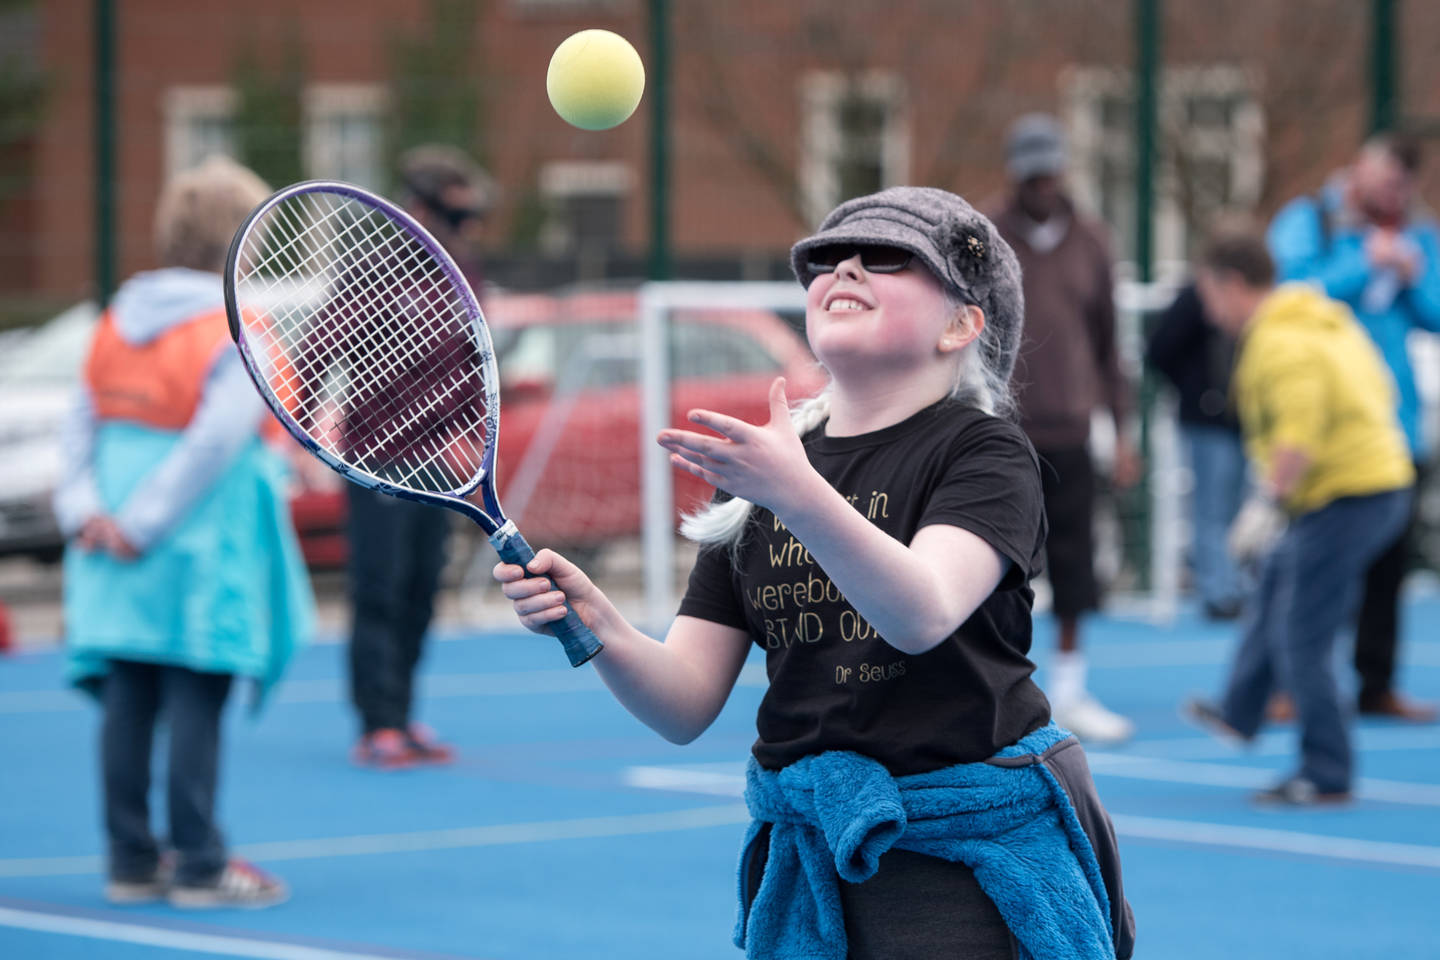 Girl with visual impairment playing tennis